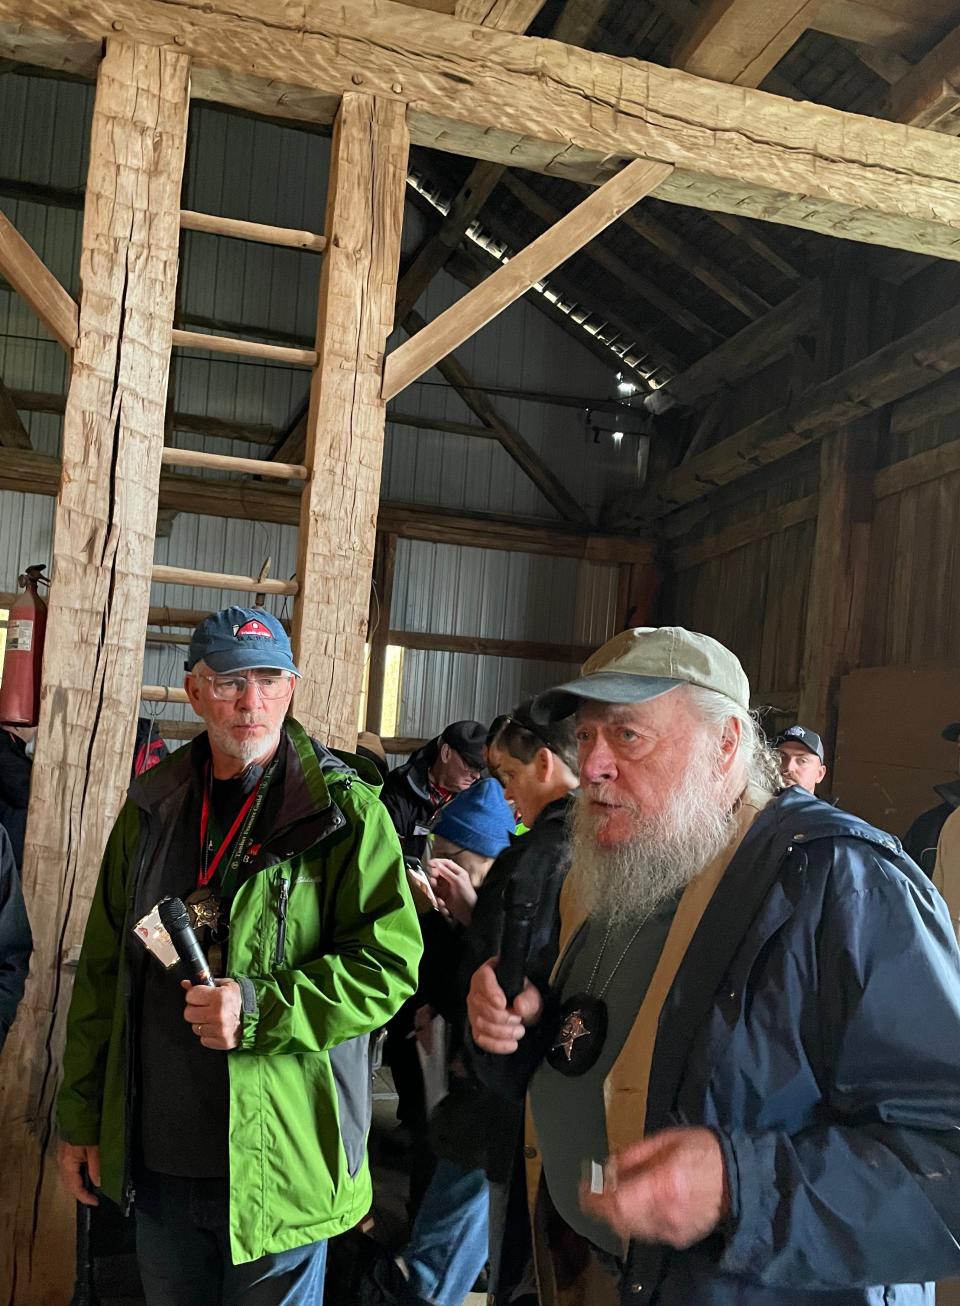 The "barn detectives" Dan Troth (left) and Rudy Christian lead about 100 people on a tour of six old barns during the Friends of Ohio Barns annual conference in Morrow County.